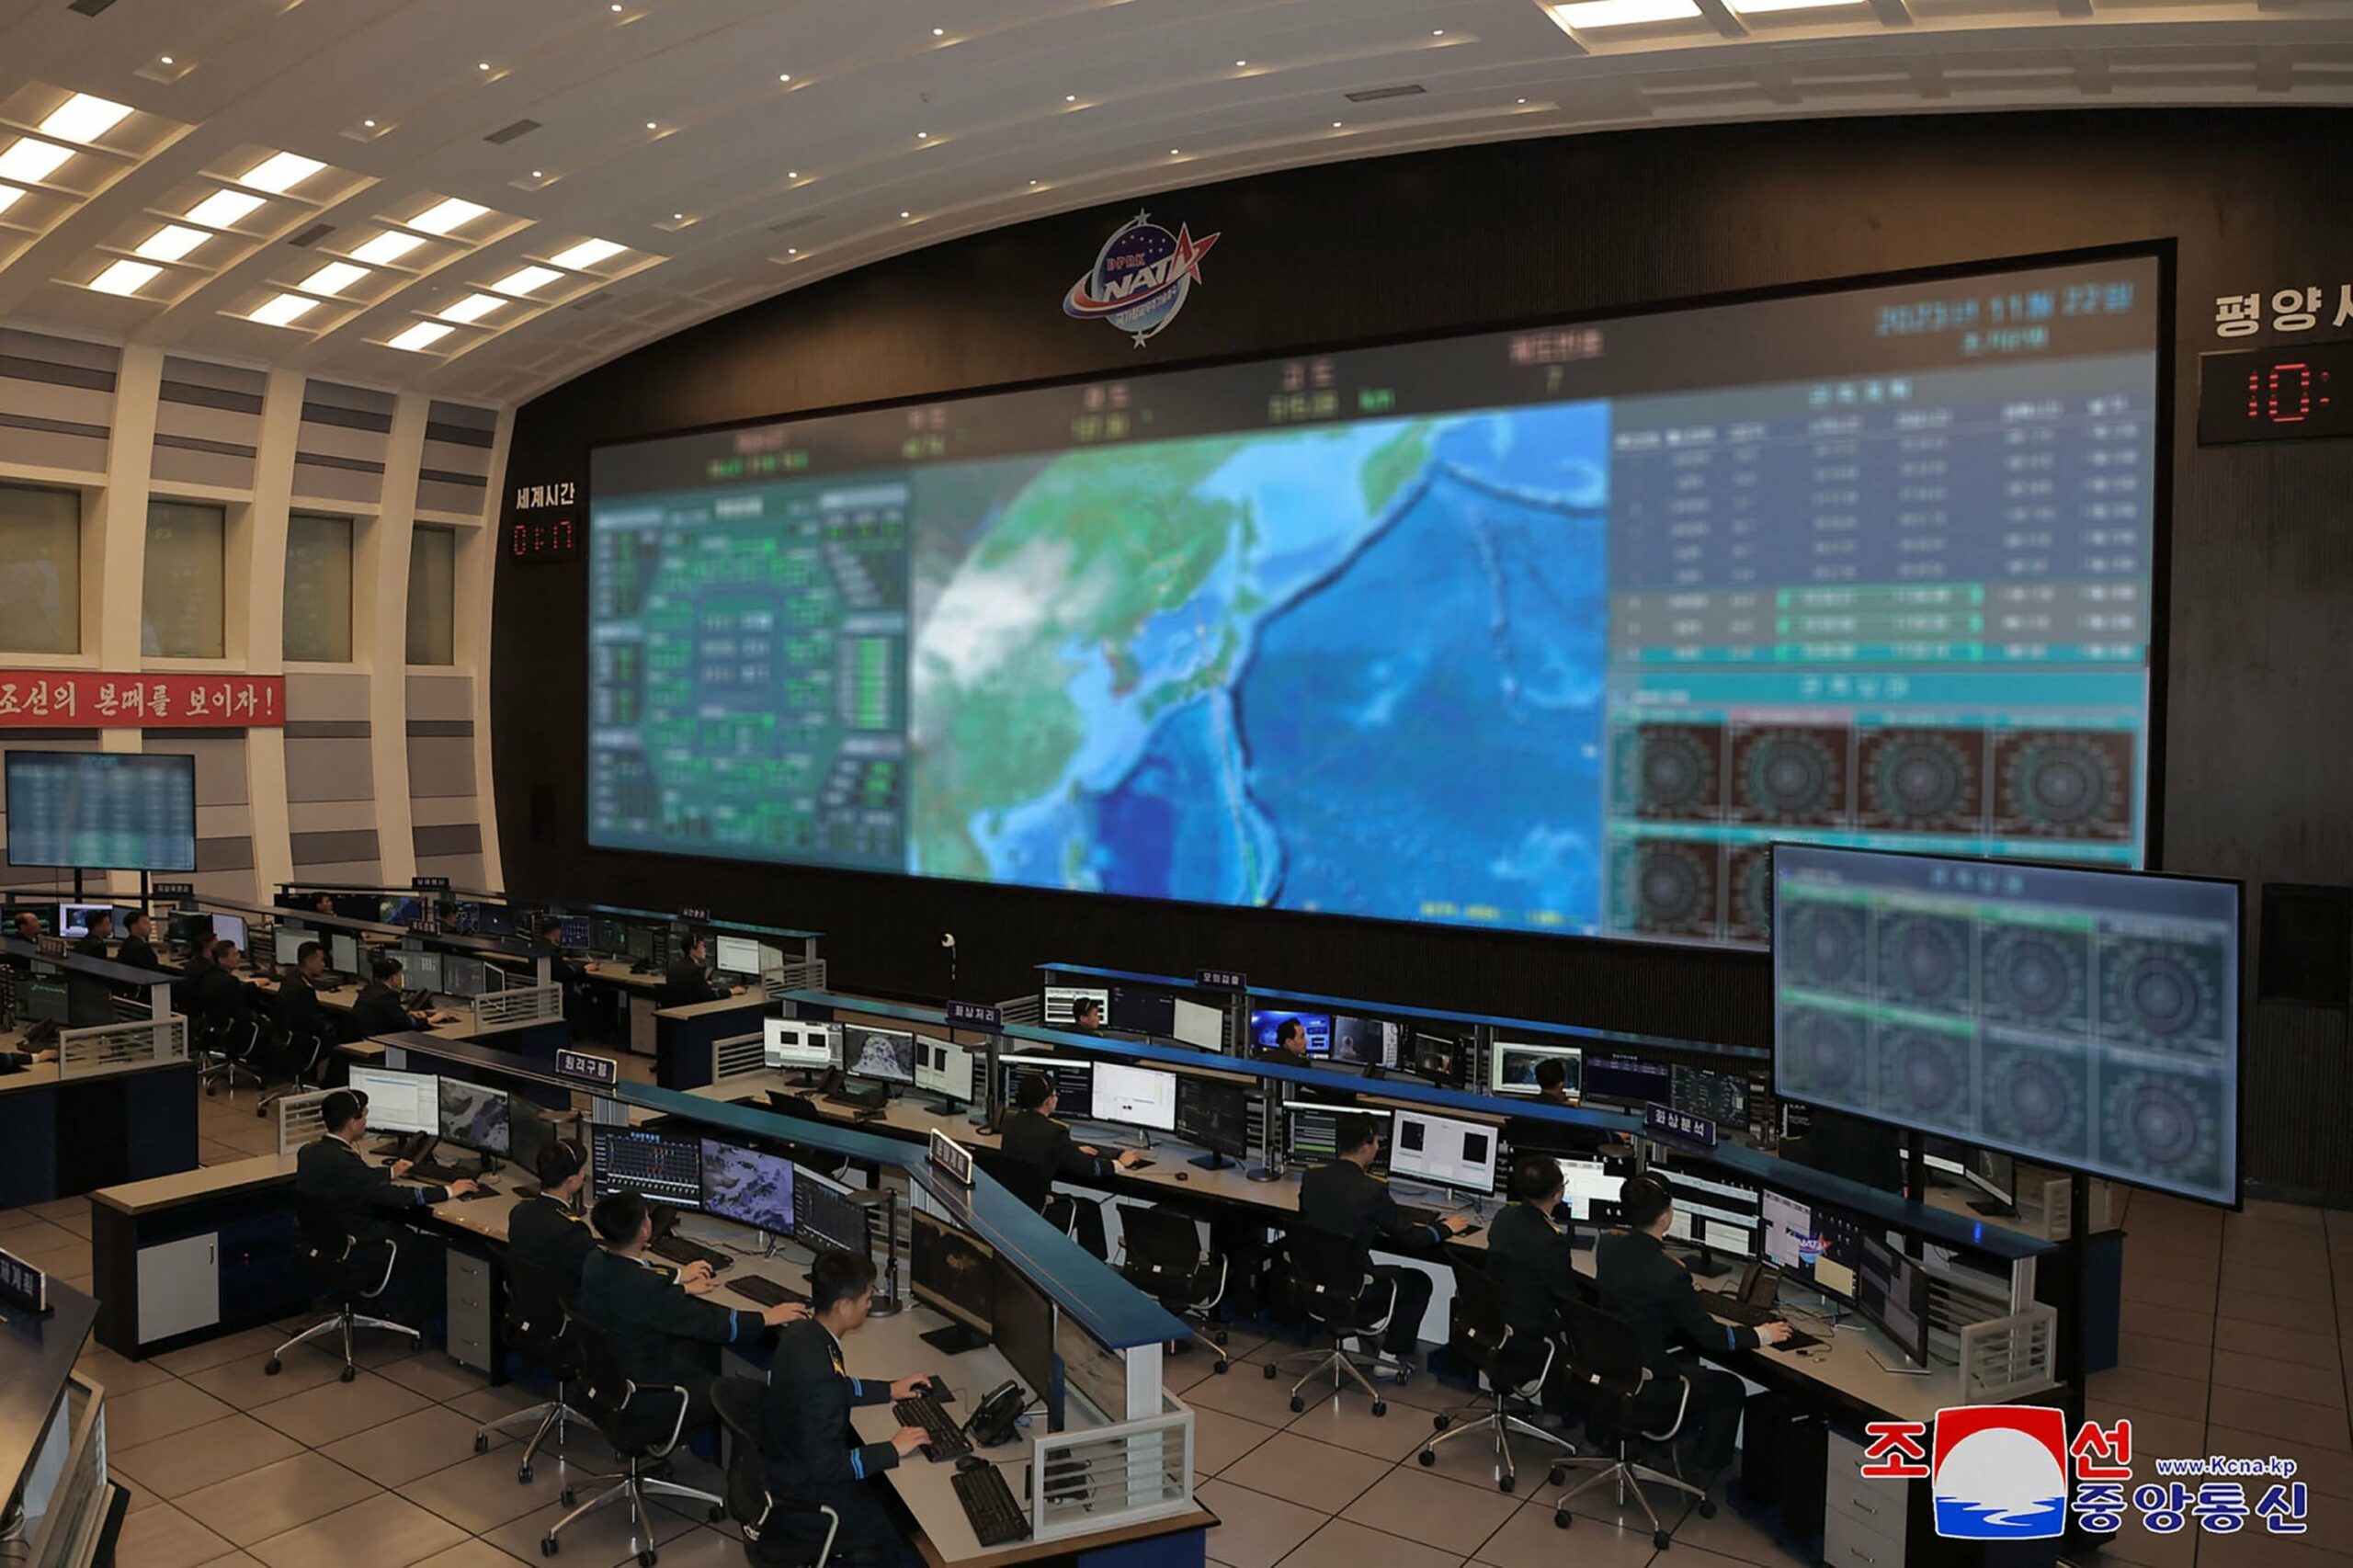 A view of the Pyongyang General Control Center of the Korean National Aerospace Technology Directorate, Pyongyang, North Korea